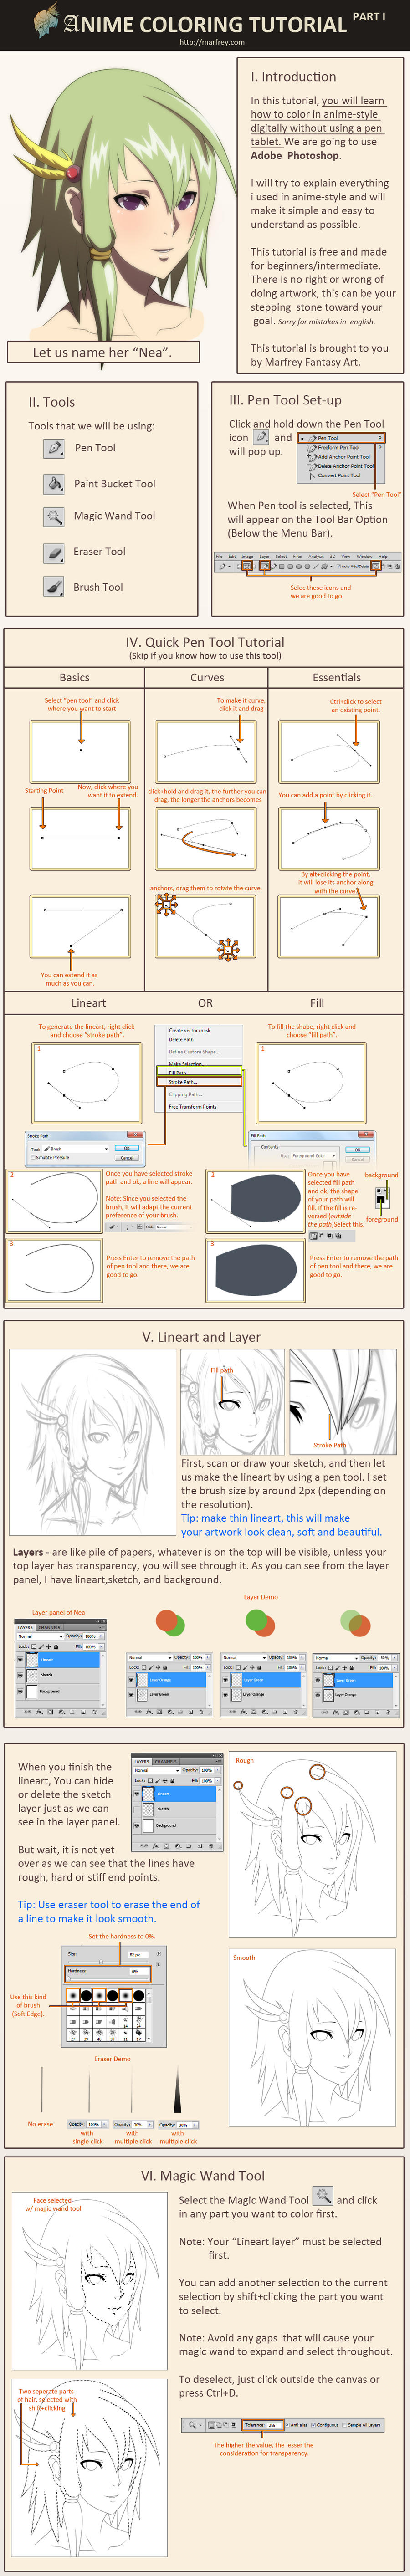 Anime Coloring Tutorial Part 1 by Marfrey on DeviantArt